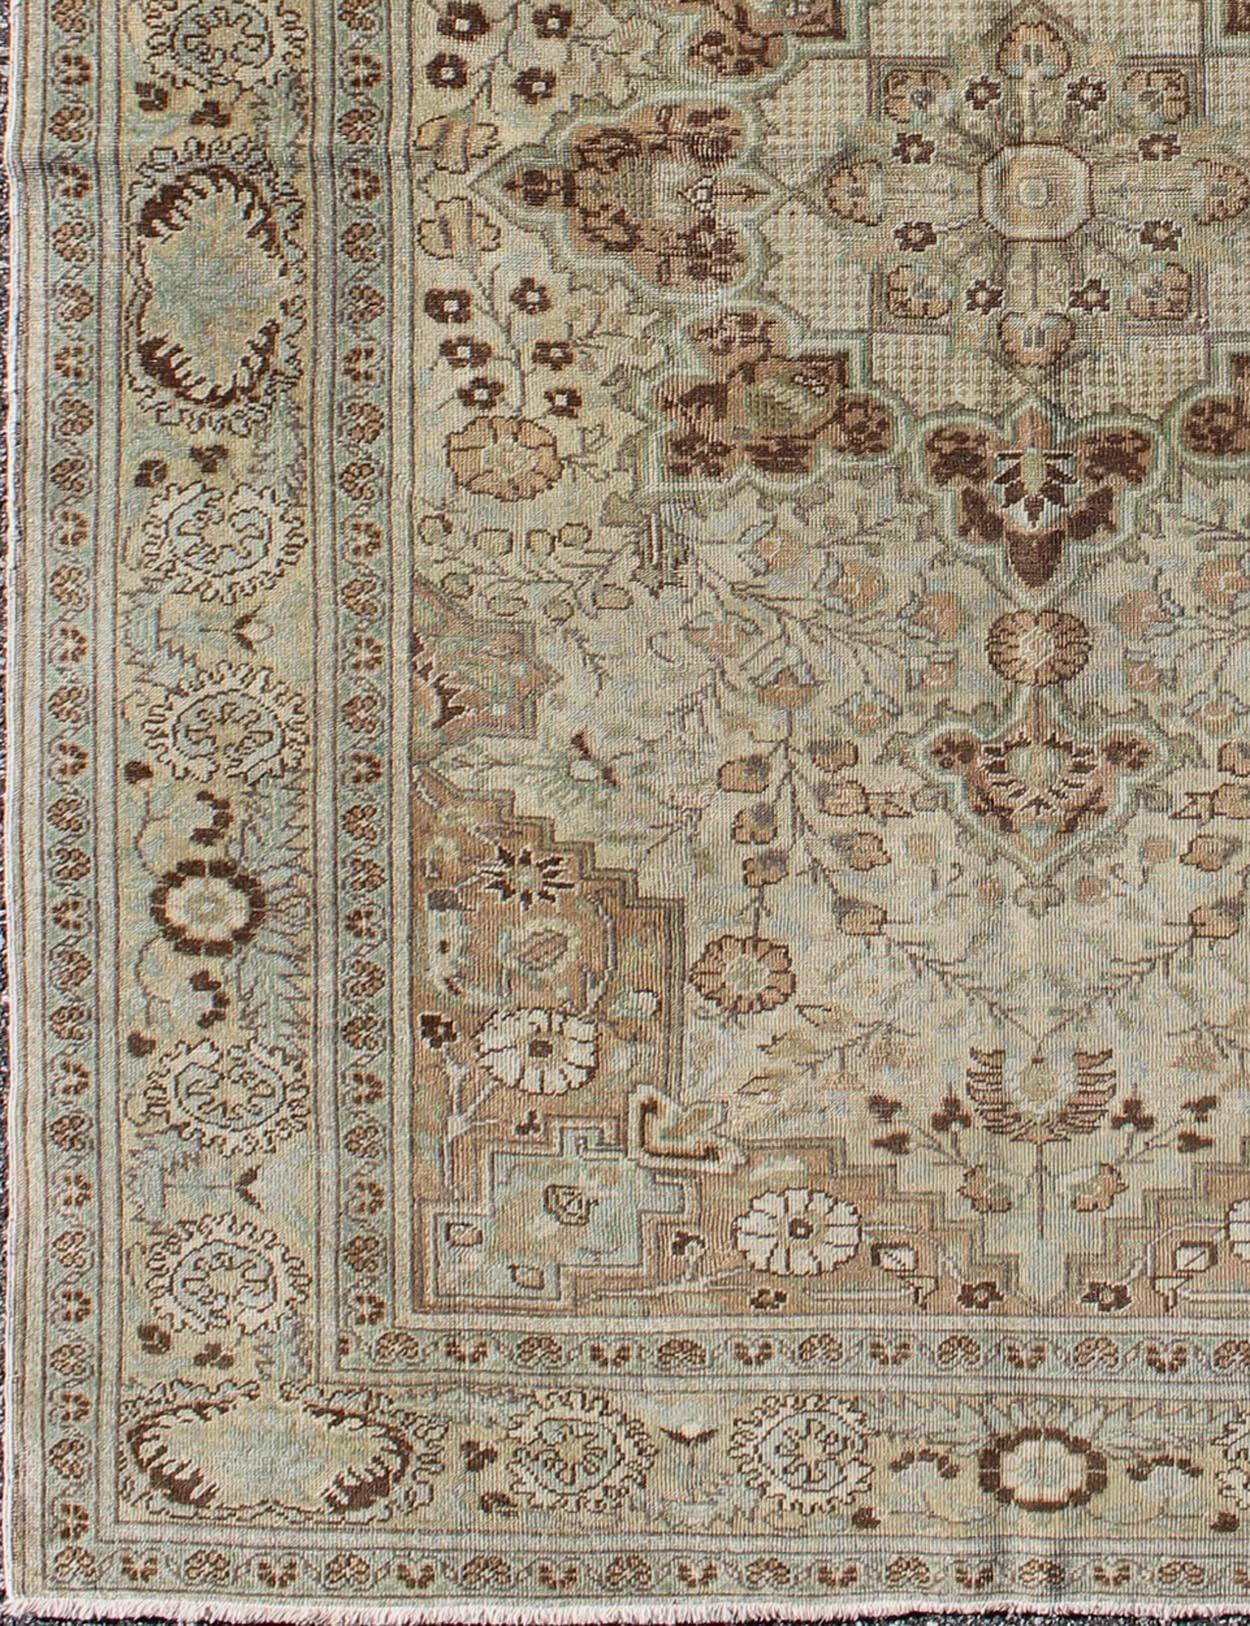 Ornate floral medallion vintage Turkish Sivas rug in brown, cream tones, rug en-140592, country of origin / type: Turkey / Sivas, circa 1930.

This sublime and enchanting vintage rug, a gorgeous Sivas rug made in Turkey during the 1930s, is a